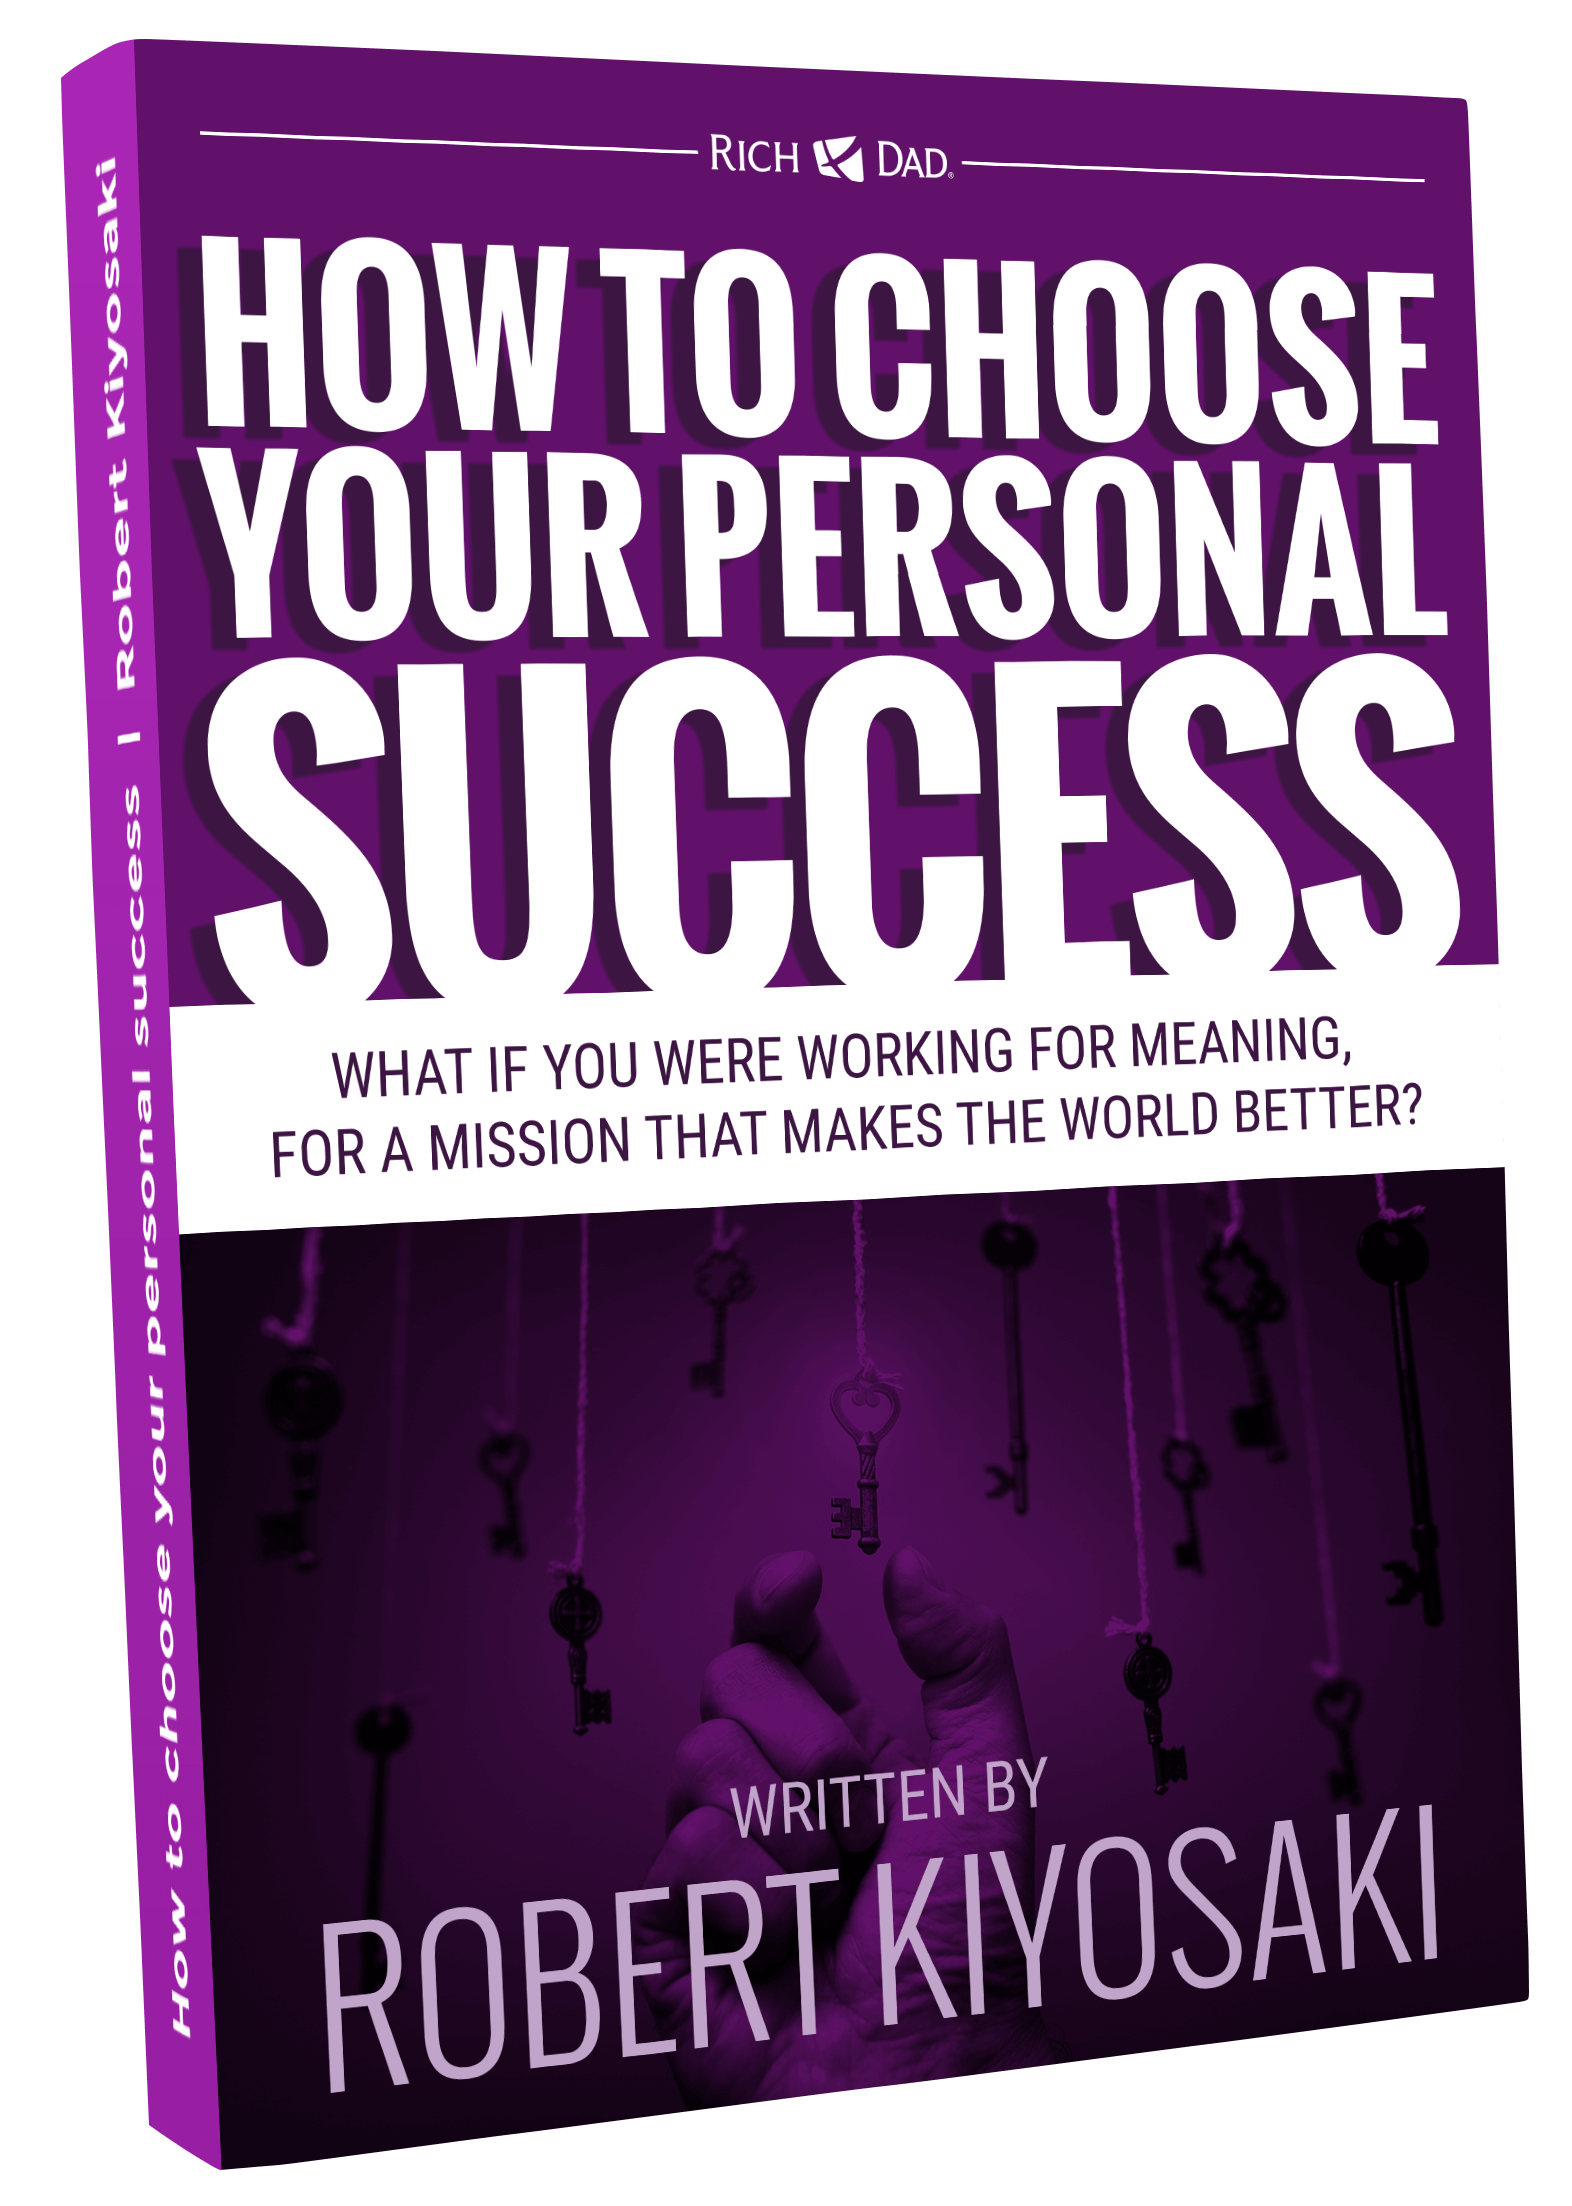 How to Choose Your Personal Success